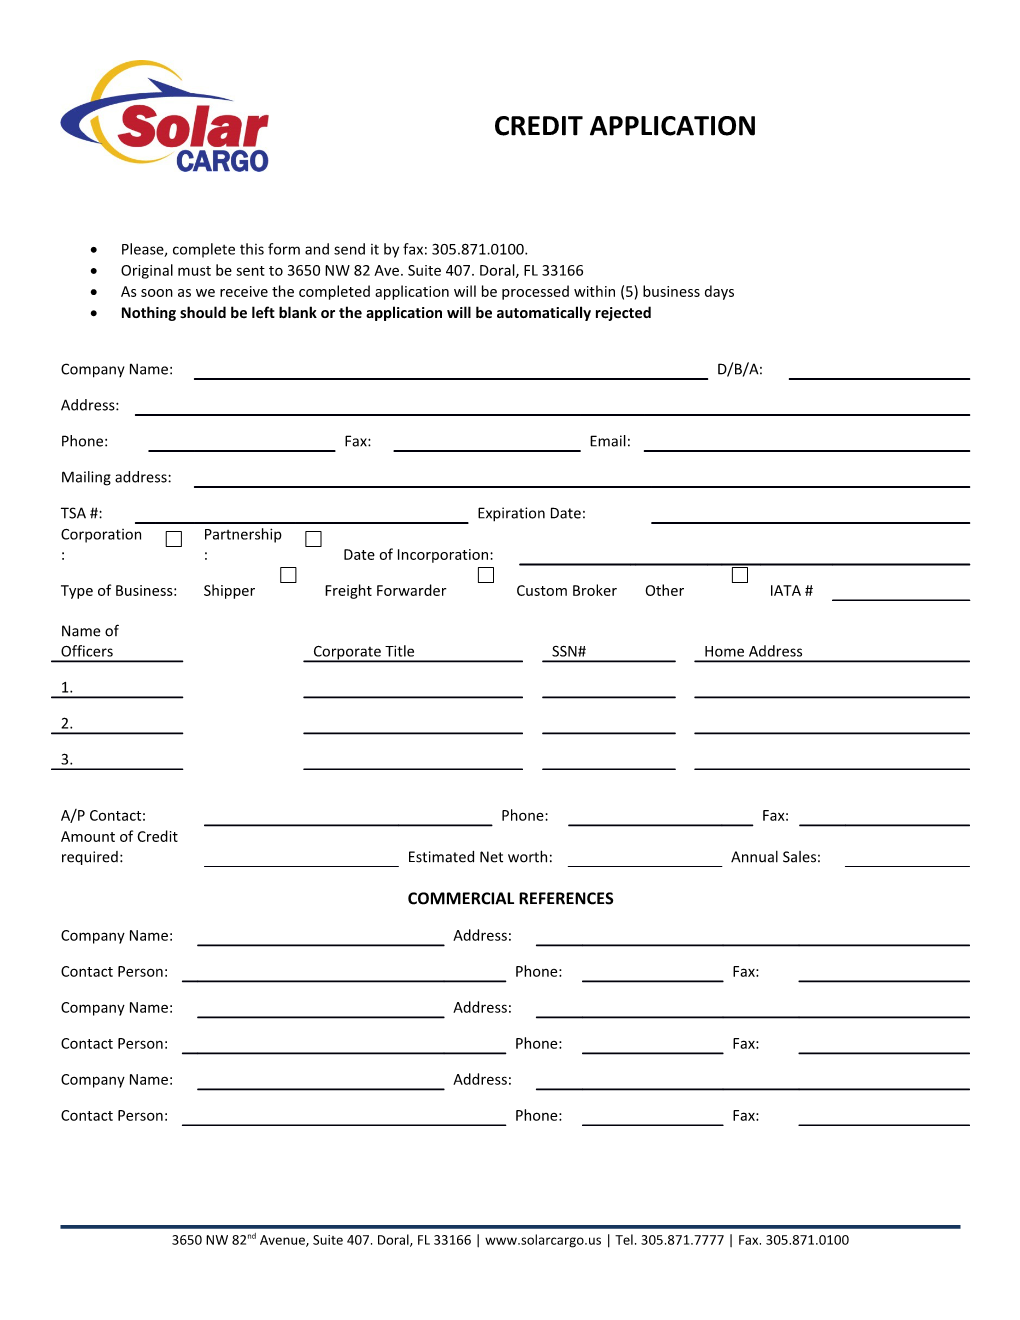 Please, Complete This Form and Send It by Fax: 305.871.0100